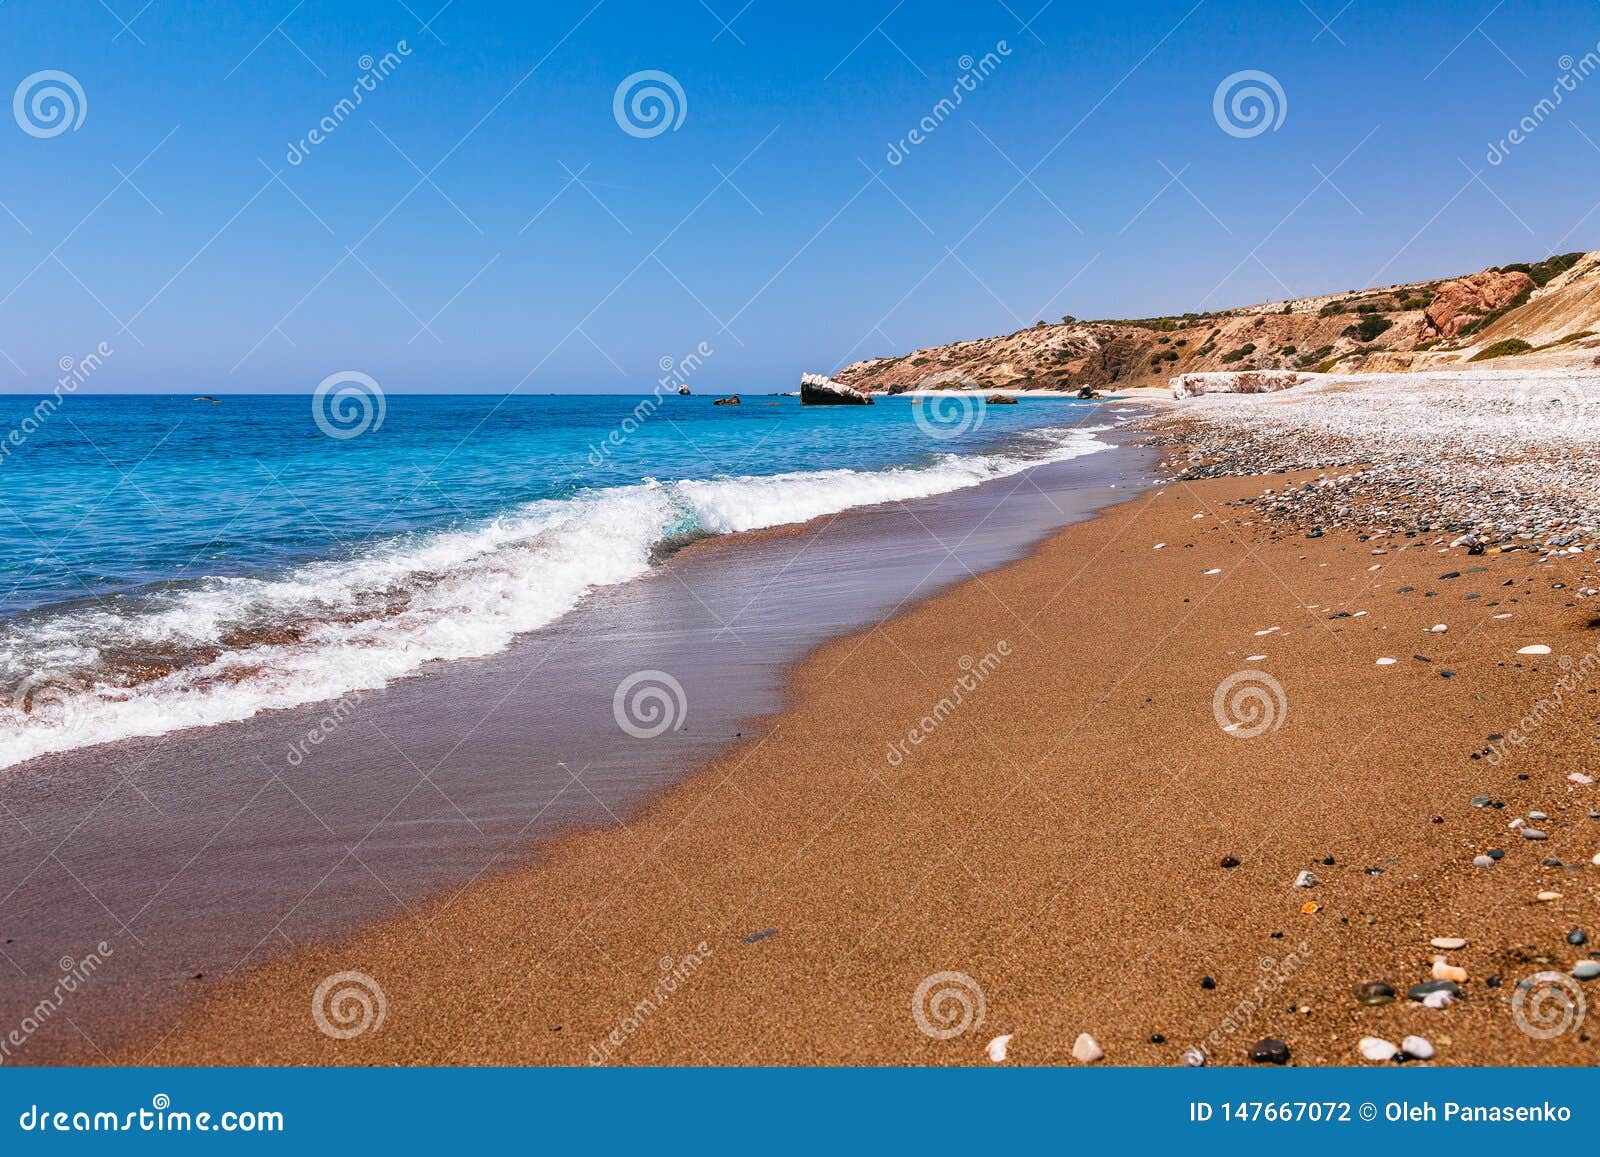 beautiful beach on petra tou romiou (the rock of the greek), aphrodite's legendary birthplace in paphos, cyprus island,